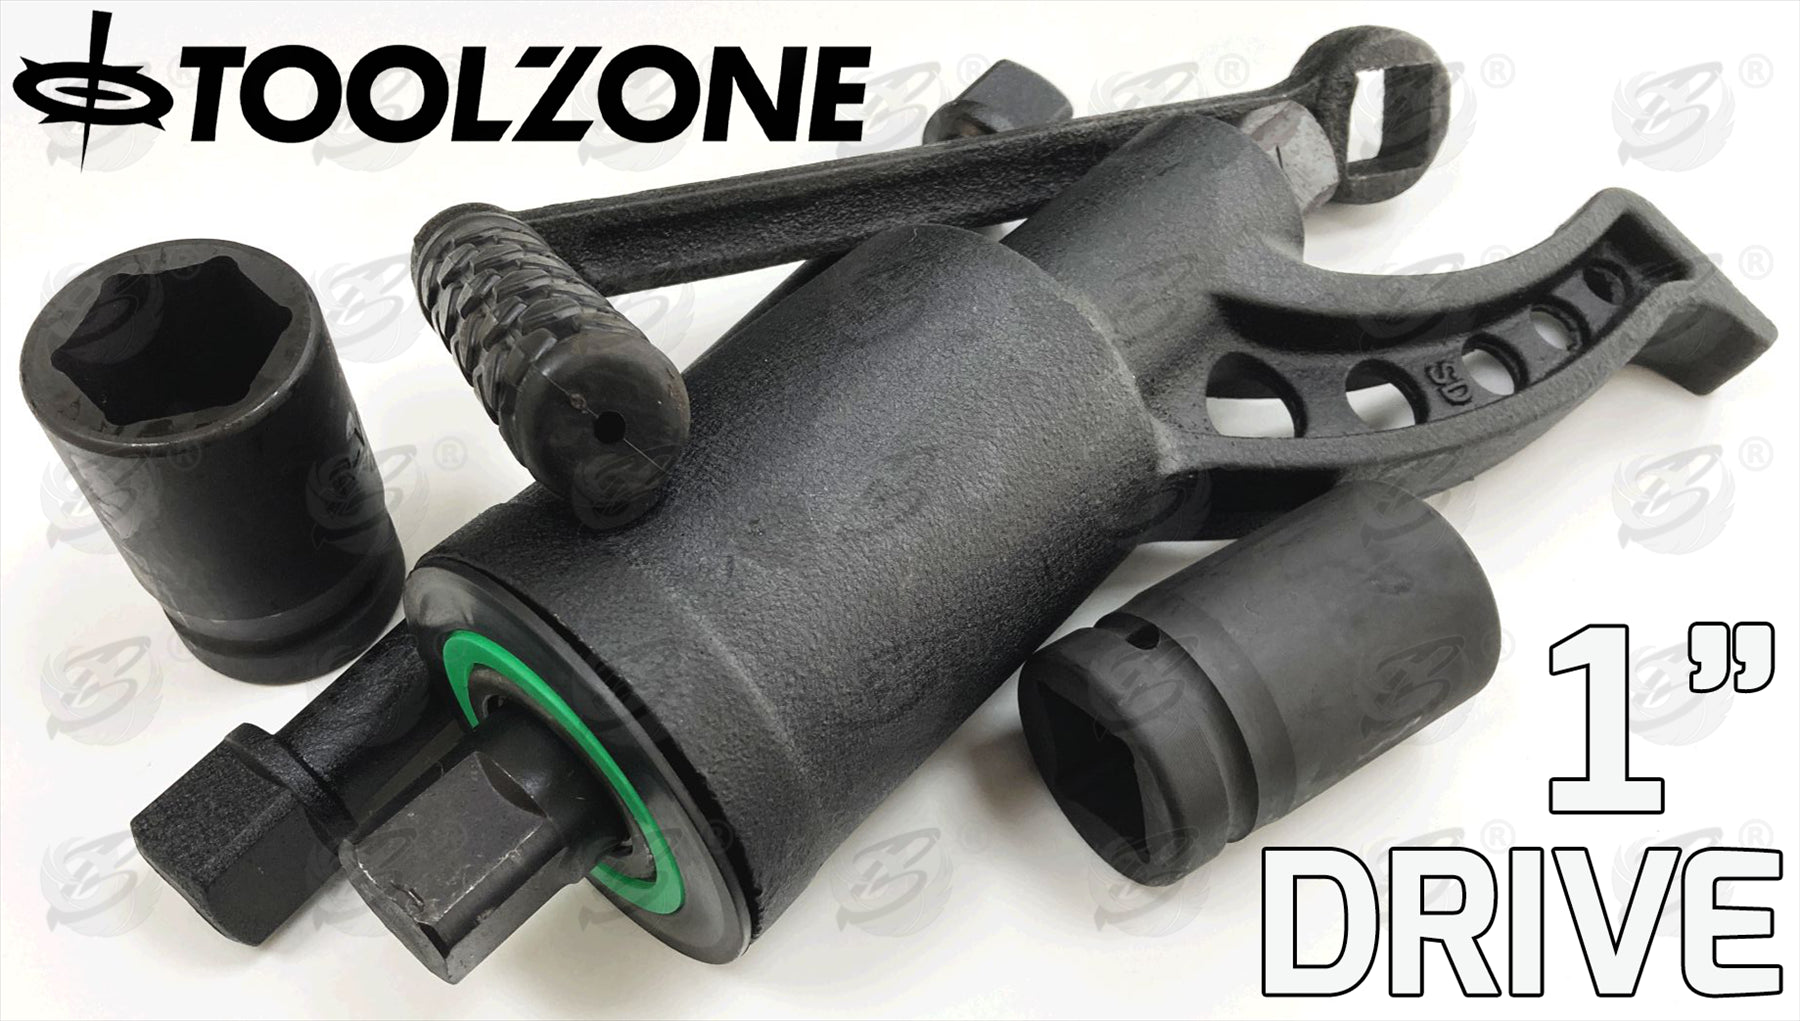 TOOLZONE 1" DRIVE TORQUE MULTIPLIER 1:68 RATIO UP TO 4800Nm ( 32MM & 33MM SOCKET INCLUDED )